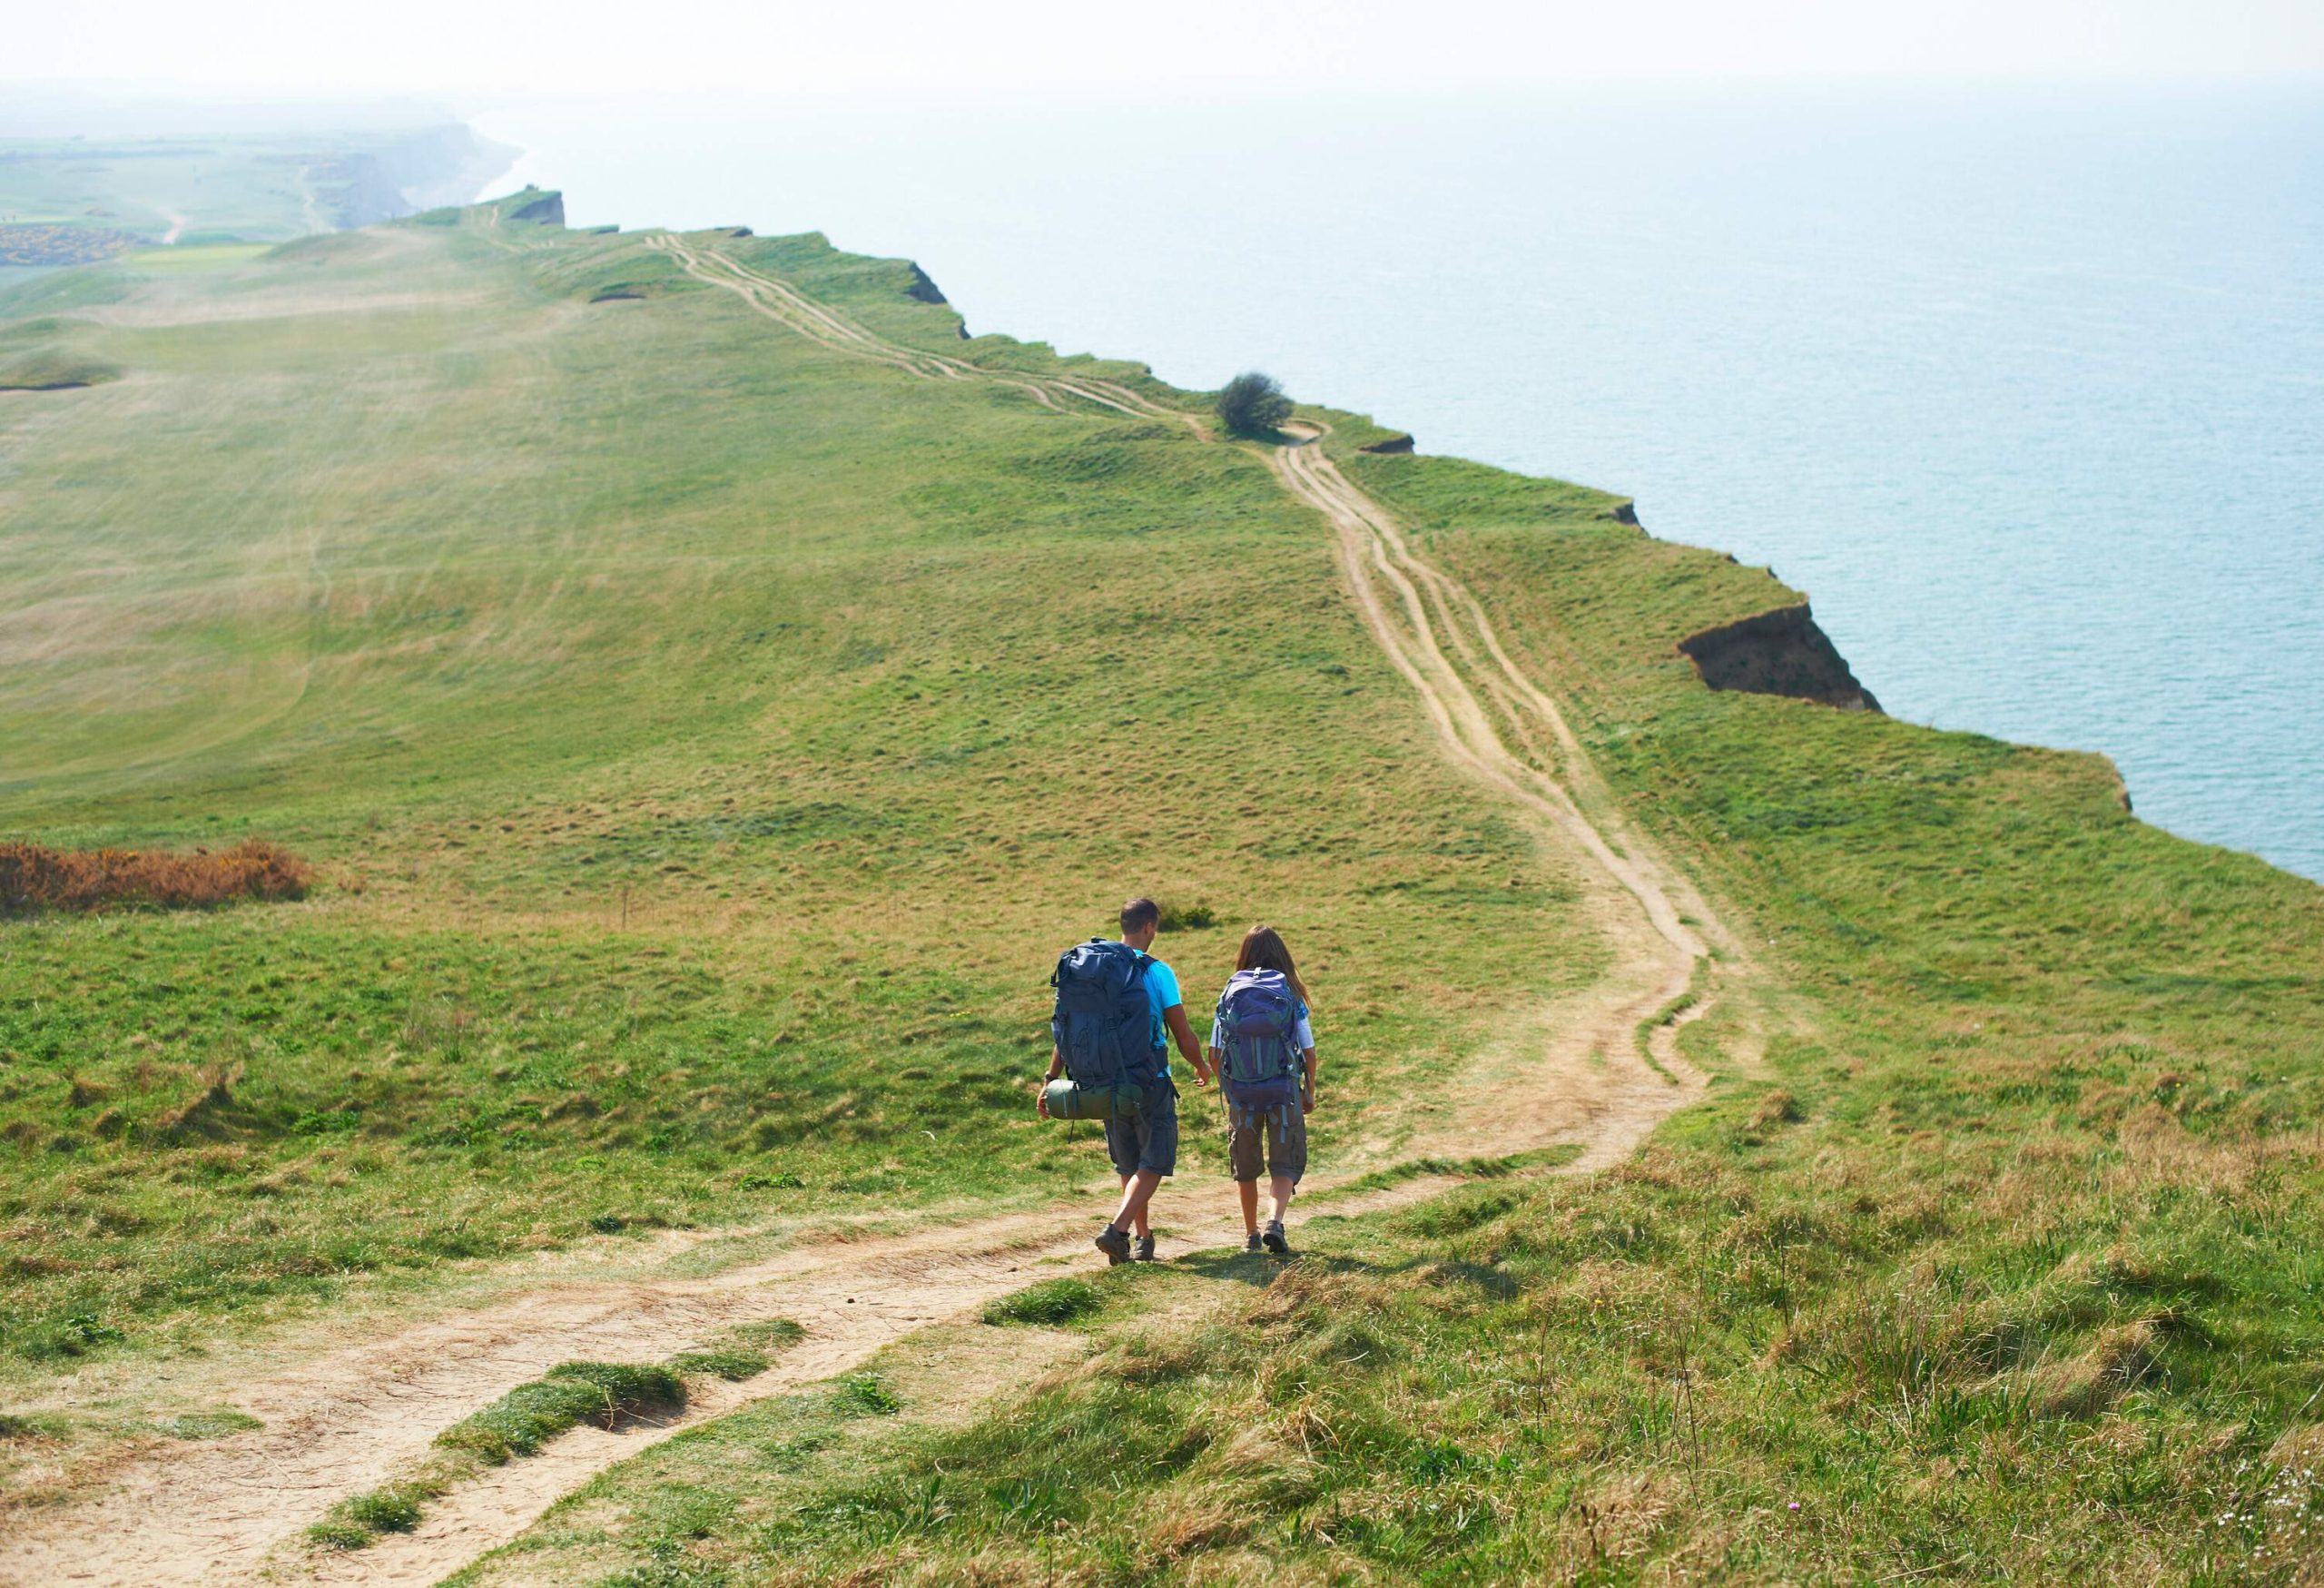 A couple hiking on a path beside a steep cliff with views of a vast ocean.